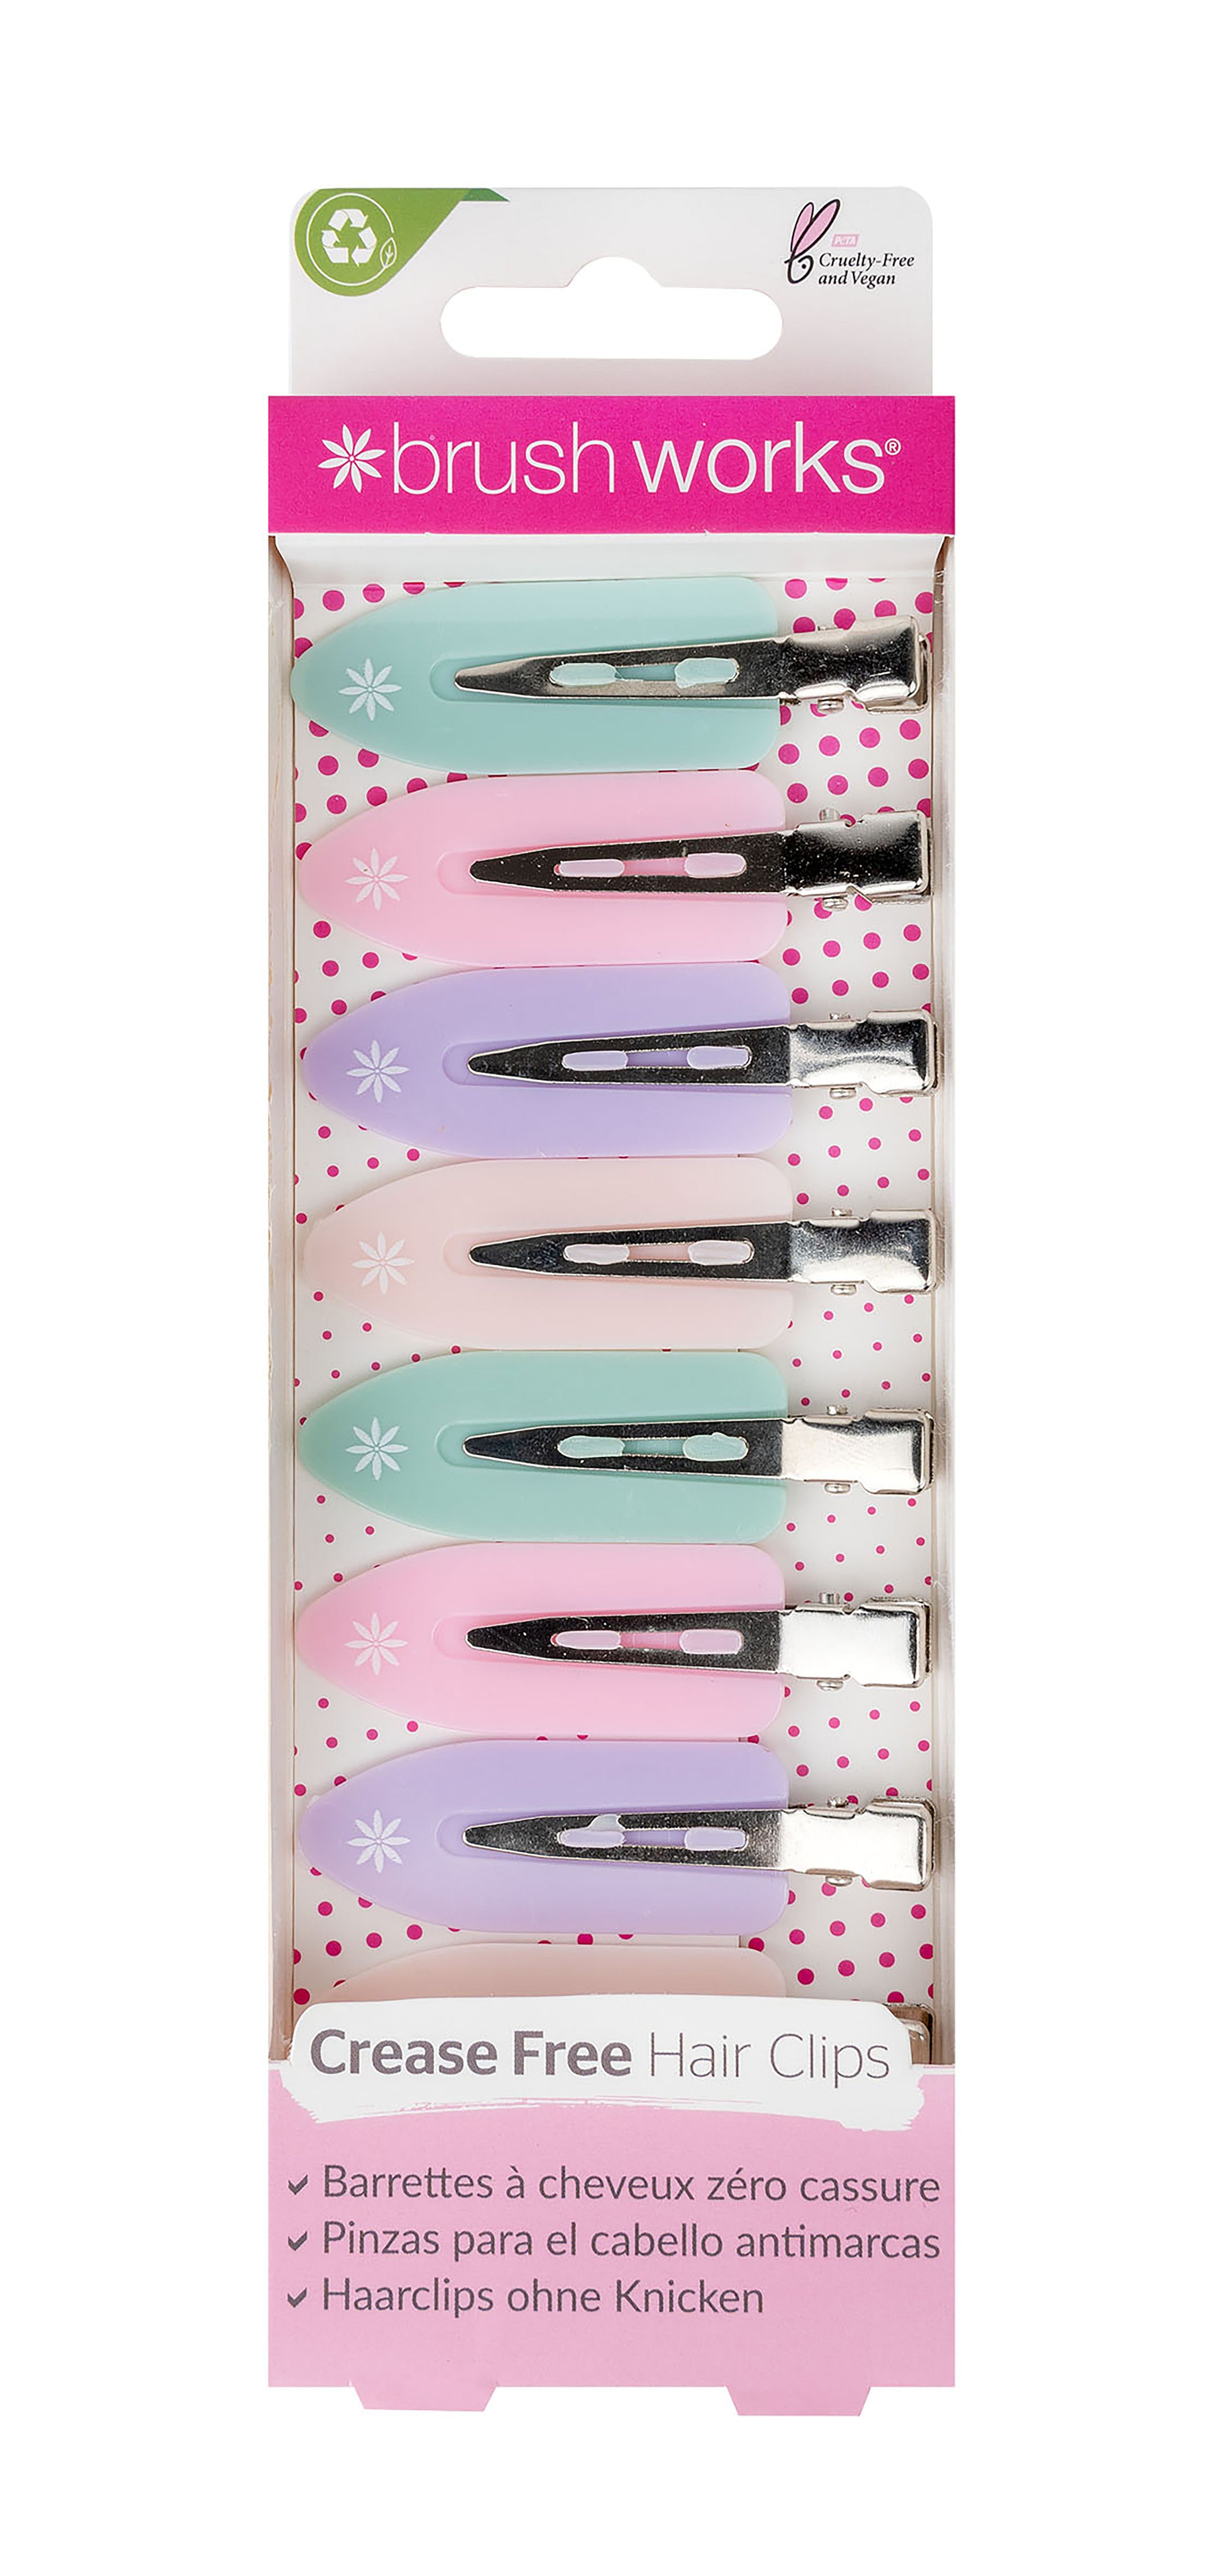 Brushworks crease free hair clips